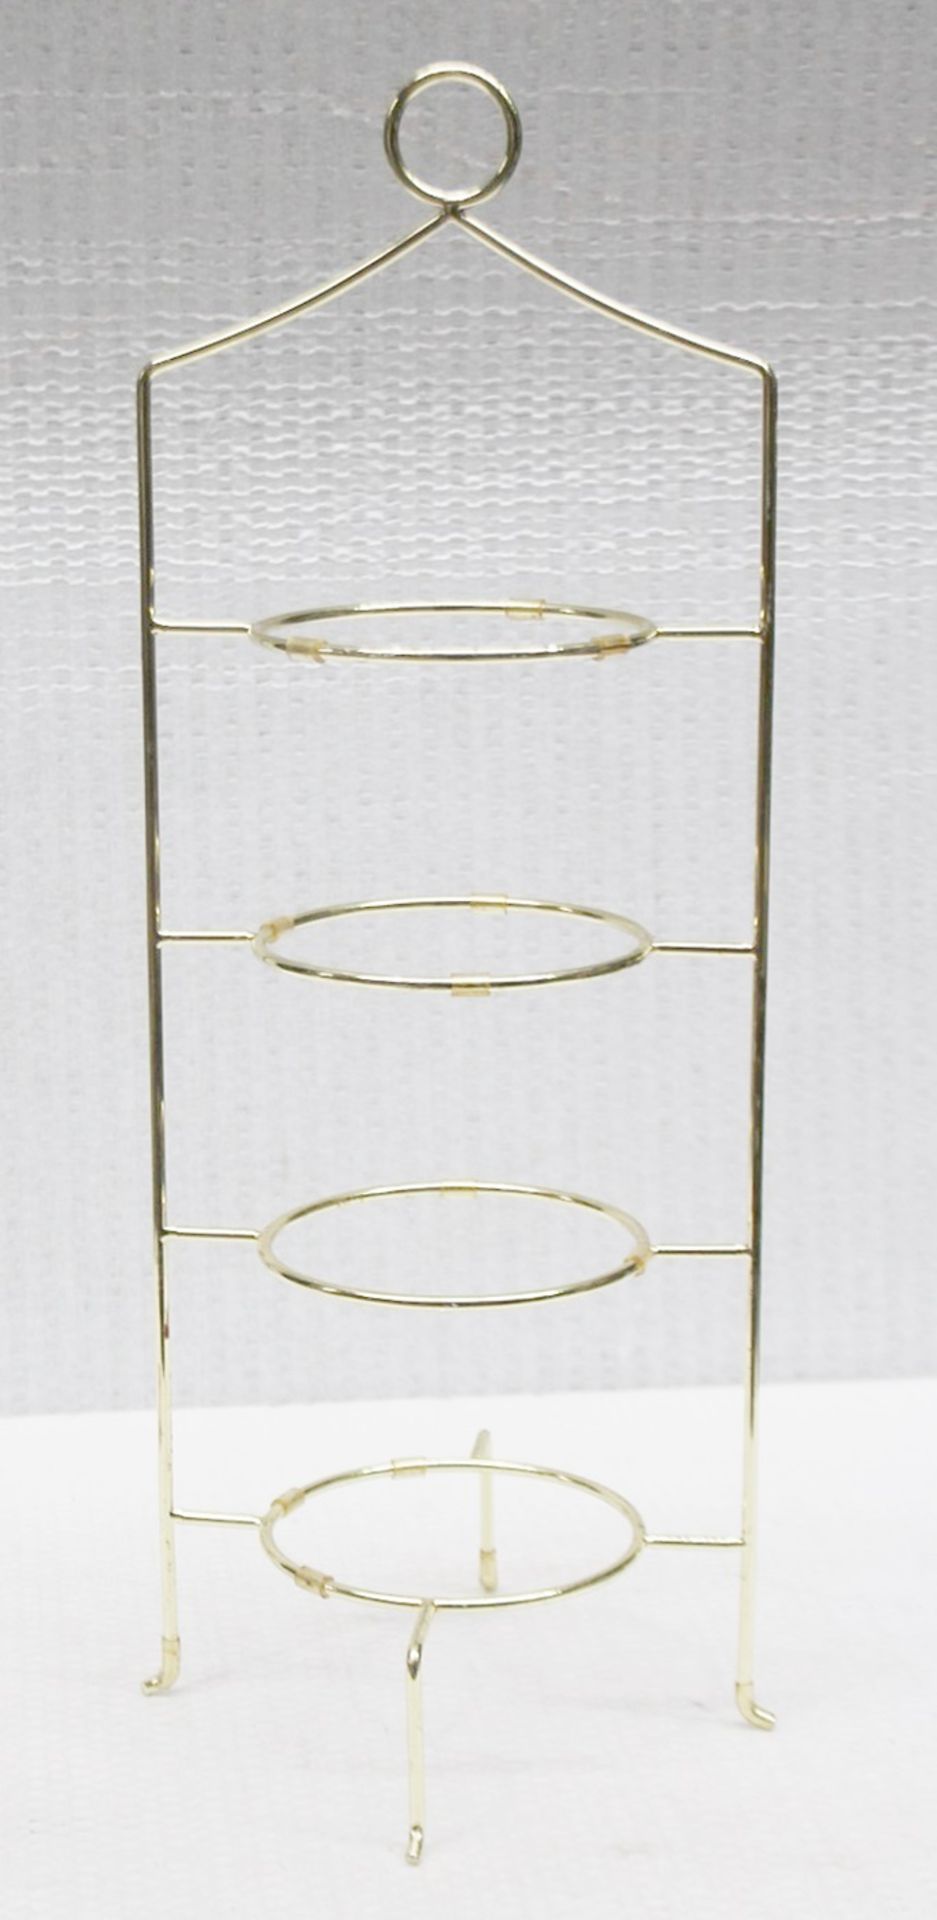 4 x Wedgwood Branded 4-Tier Luxury Metal Afternoon Tea Plate Stands With A Gold Finish - Recently